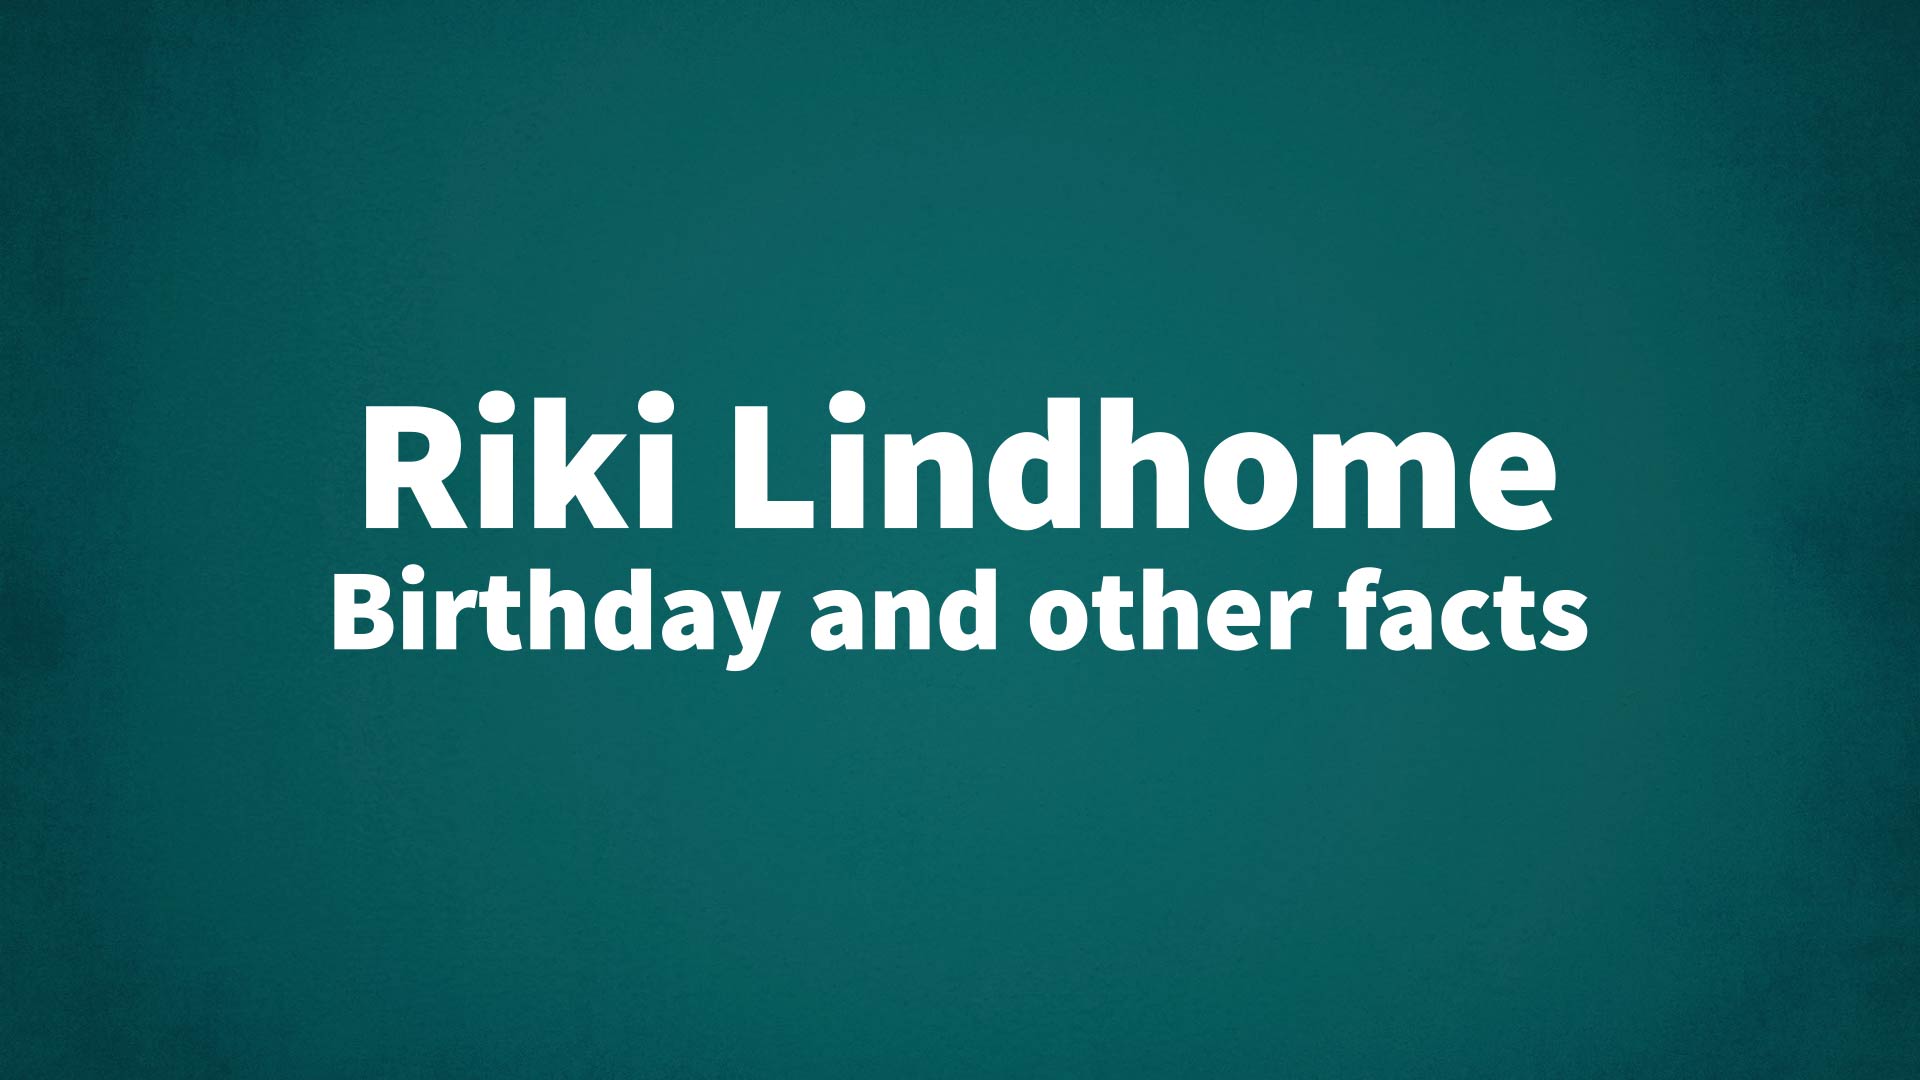 title image for Riki Lindhome birthday